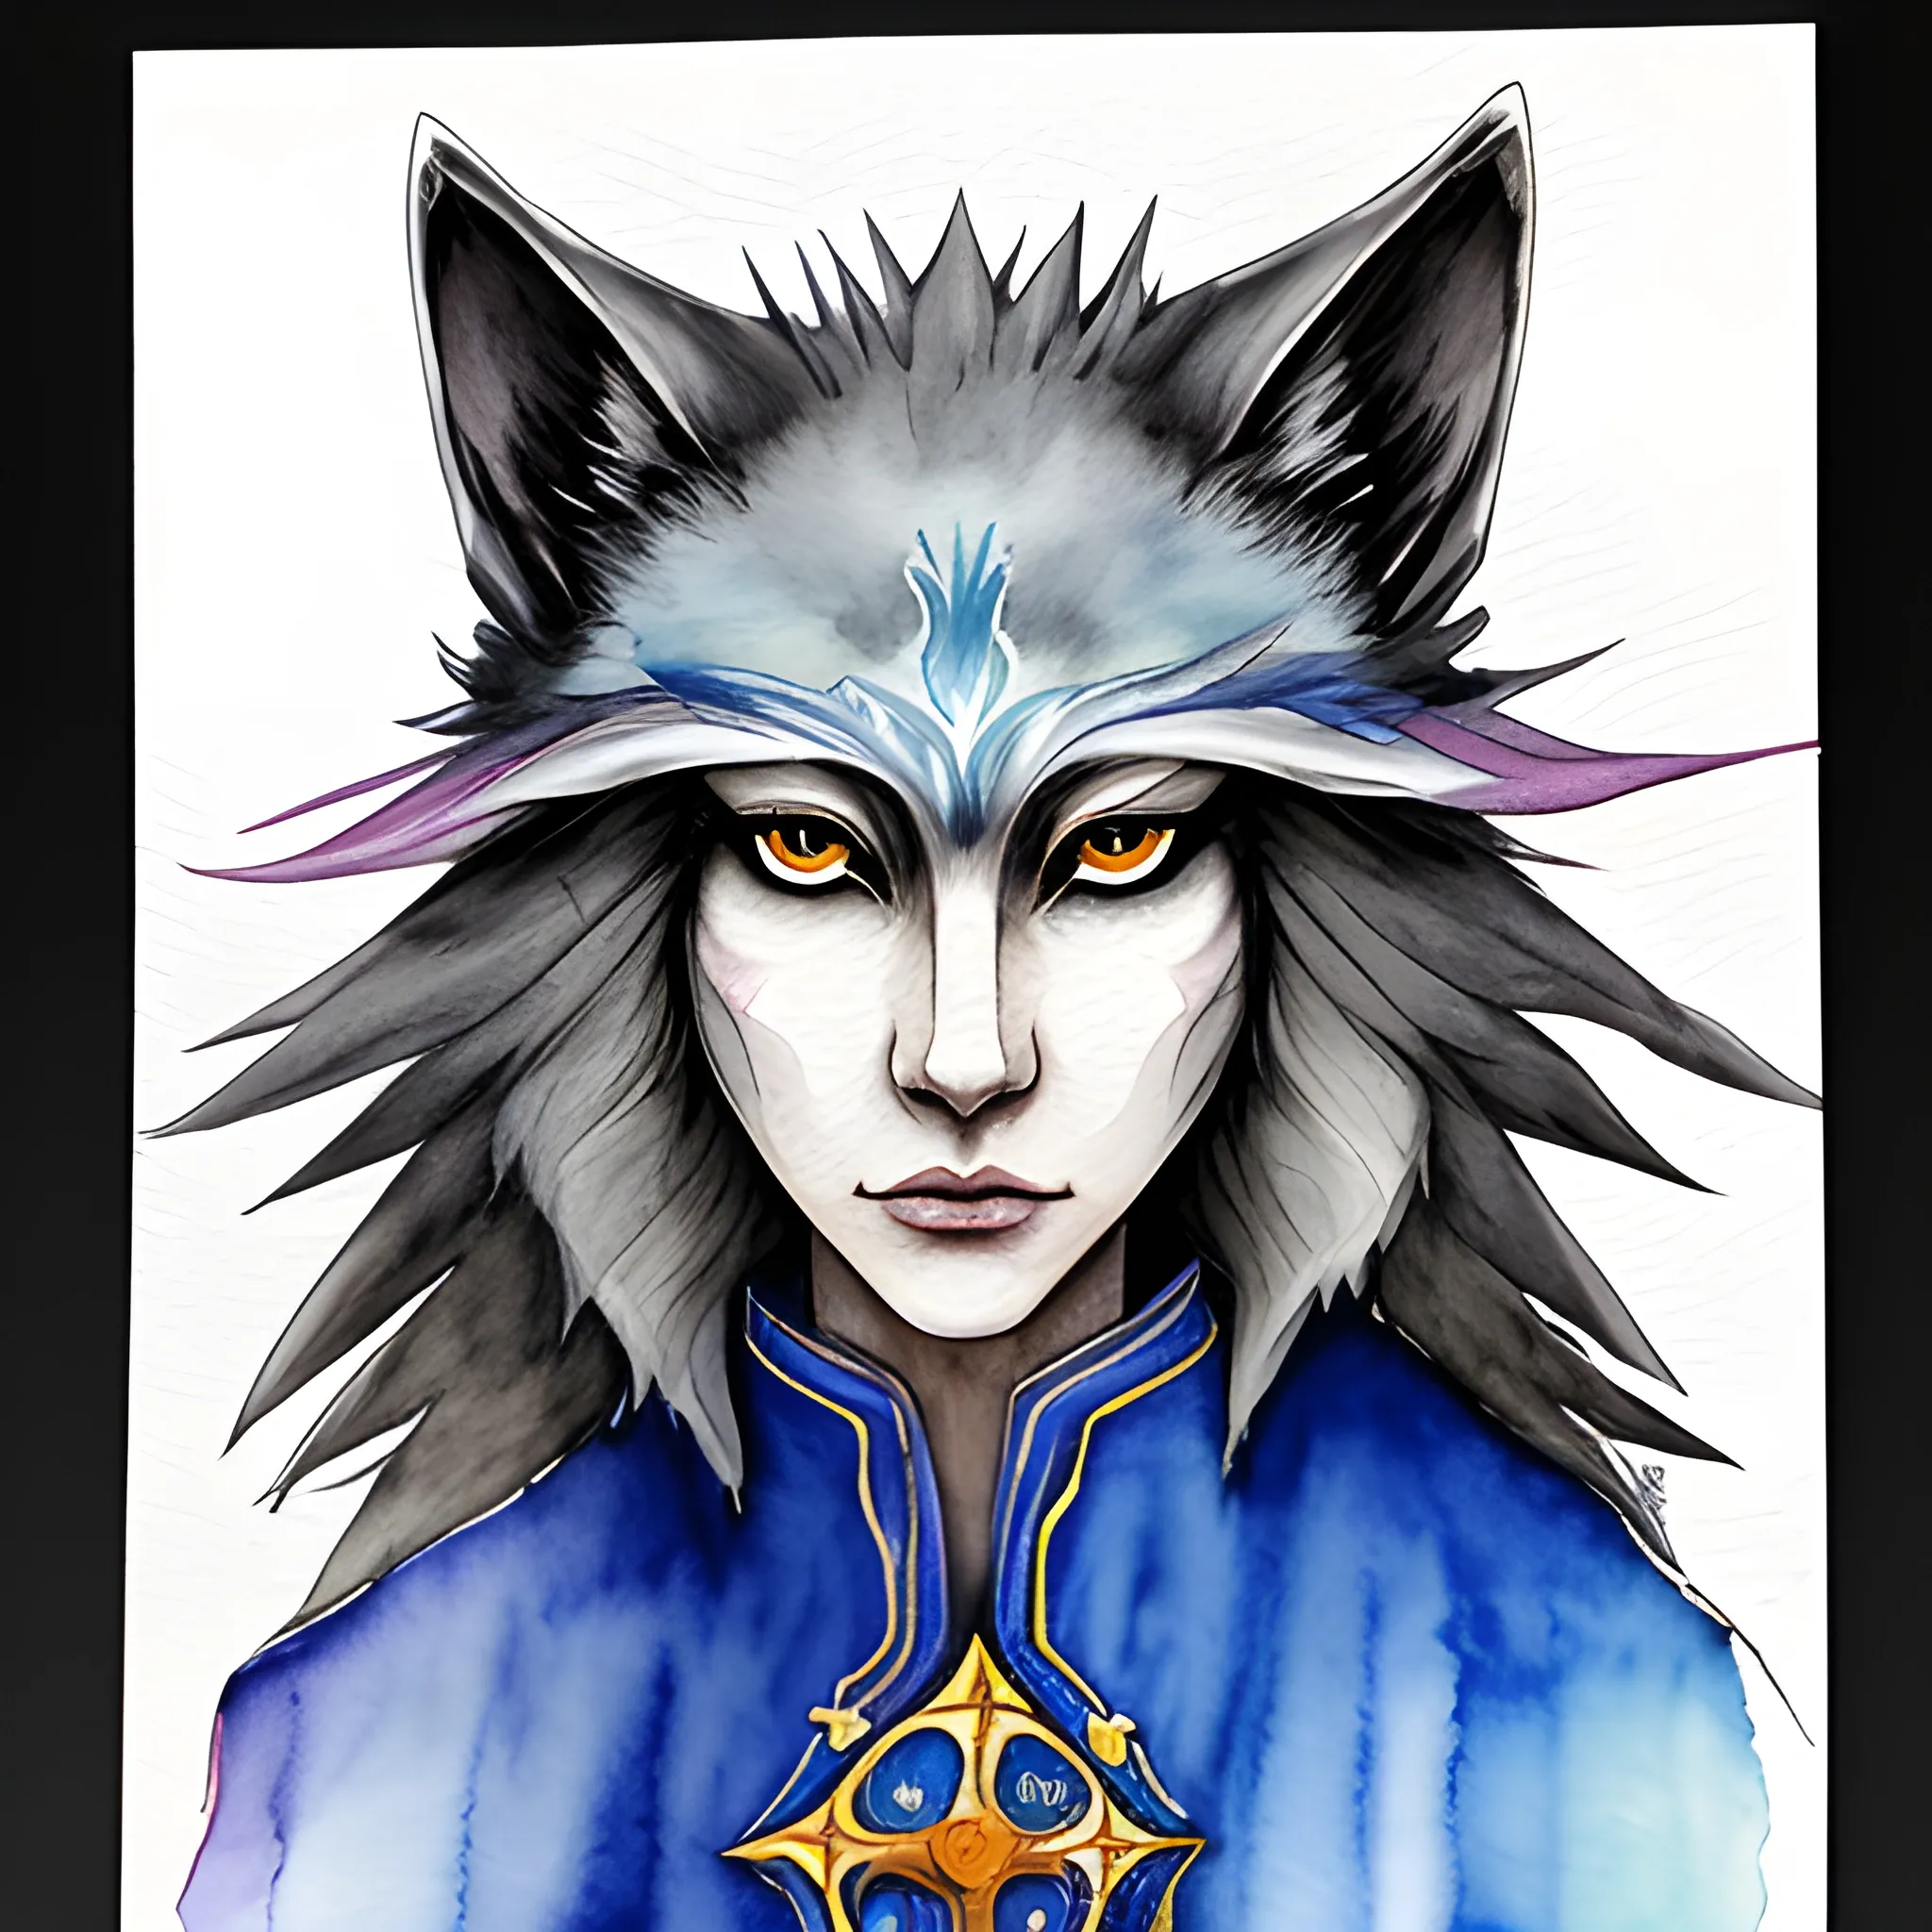 Healer priest she wolf, Water Color